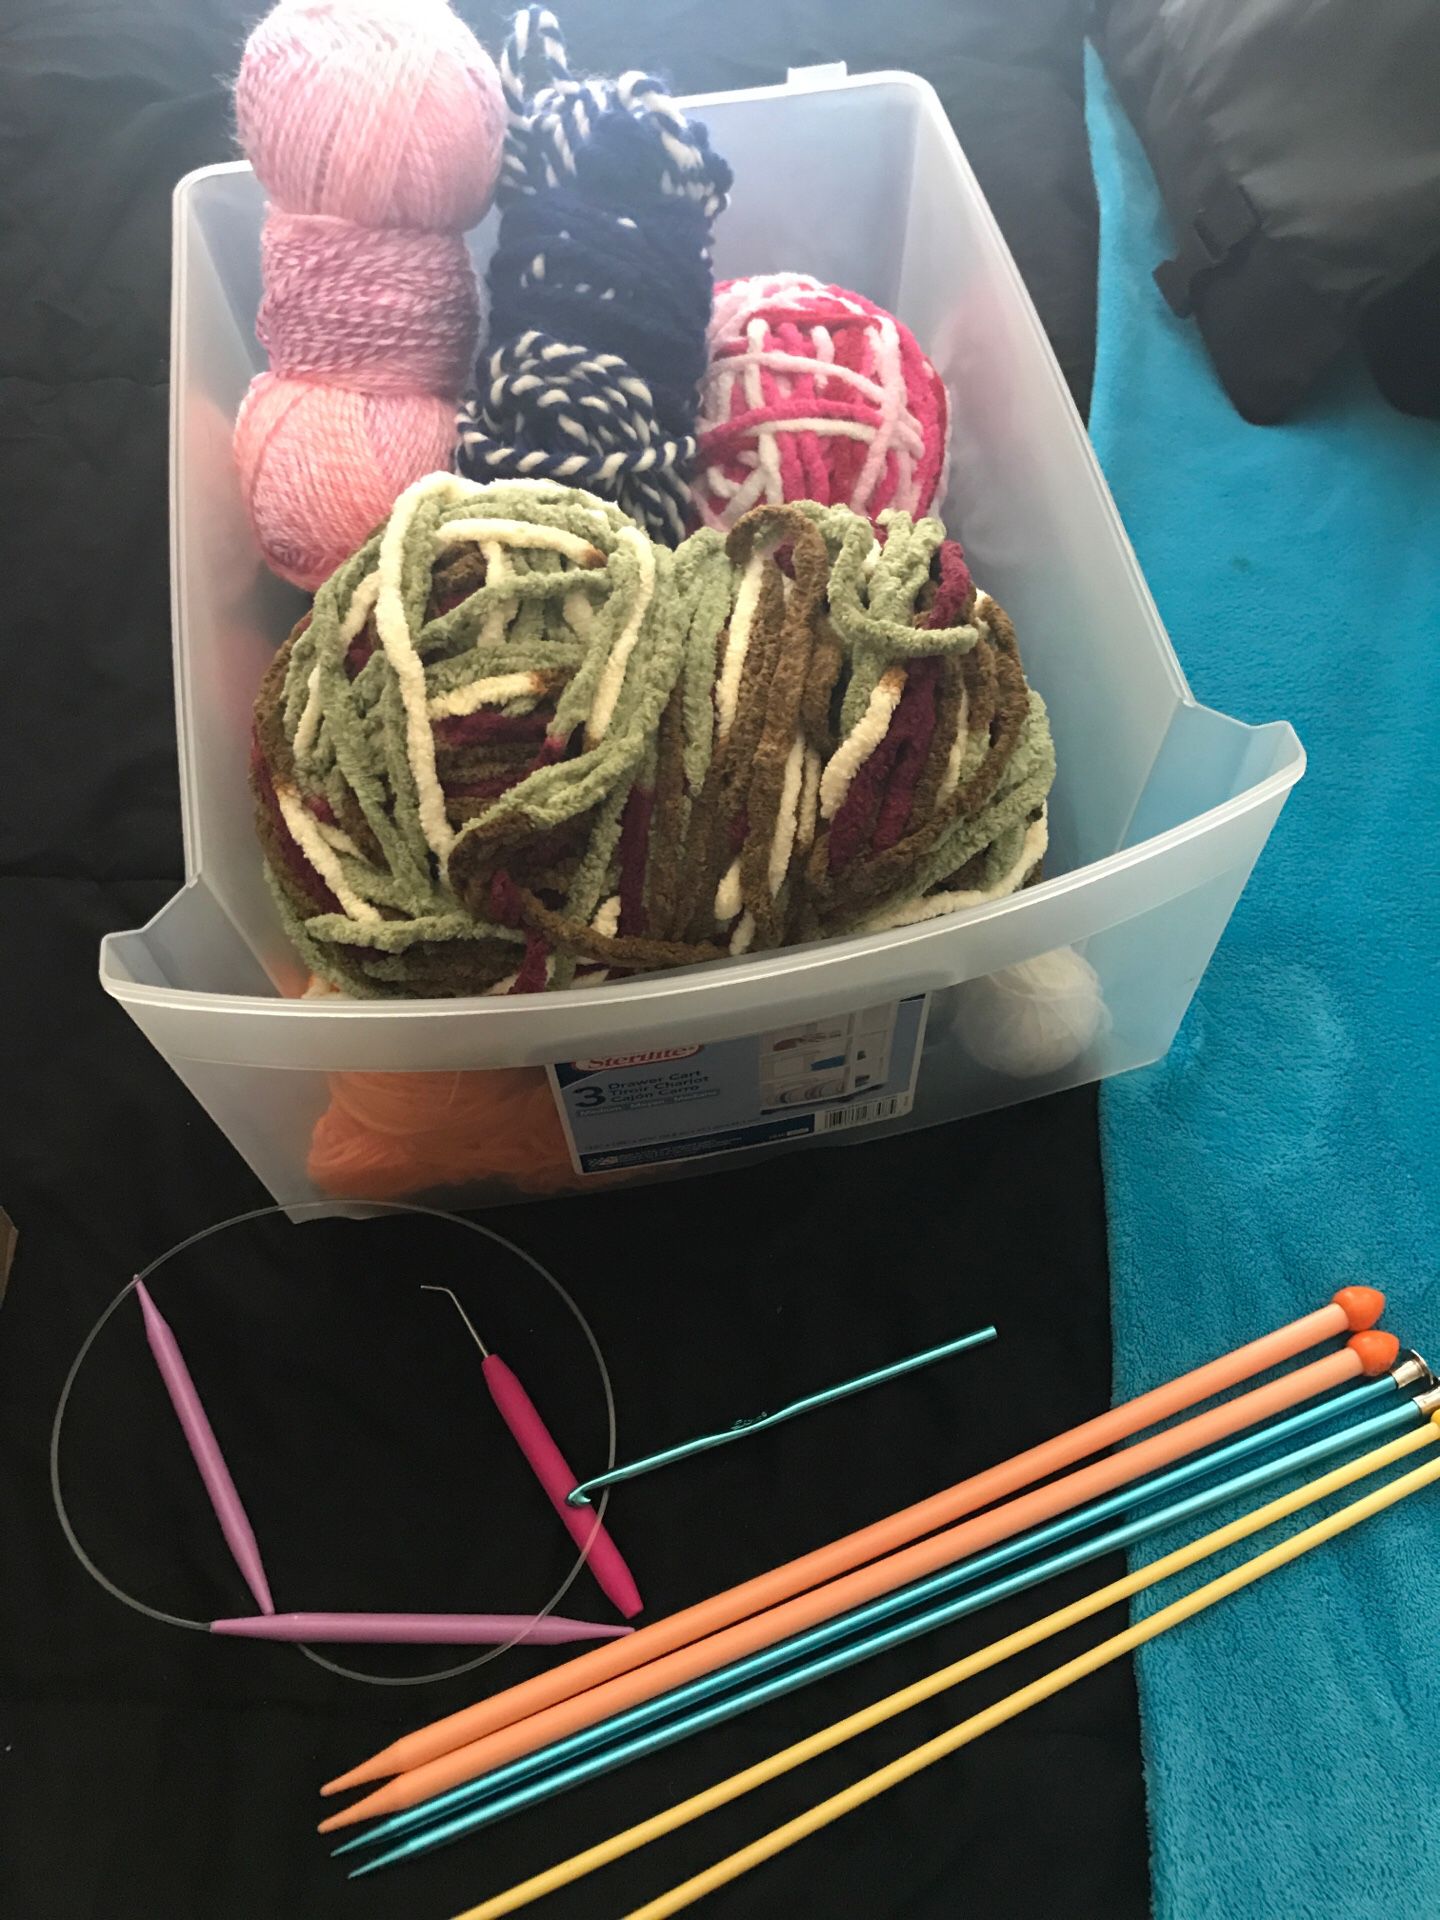 Assorted yarn and needles